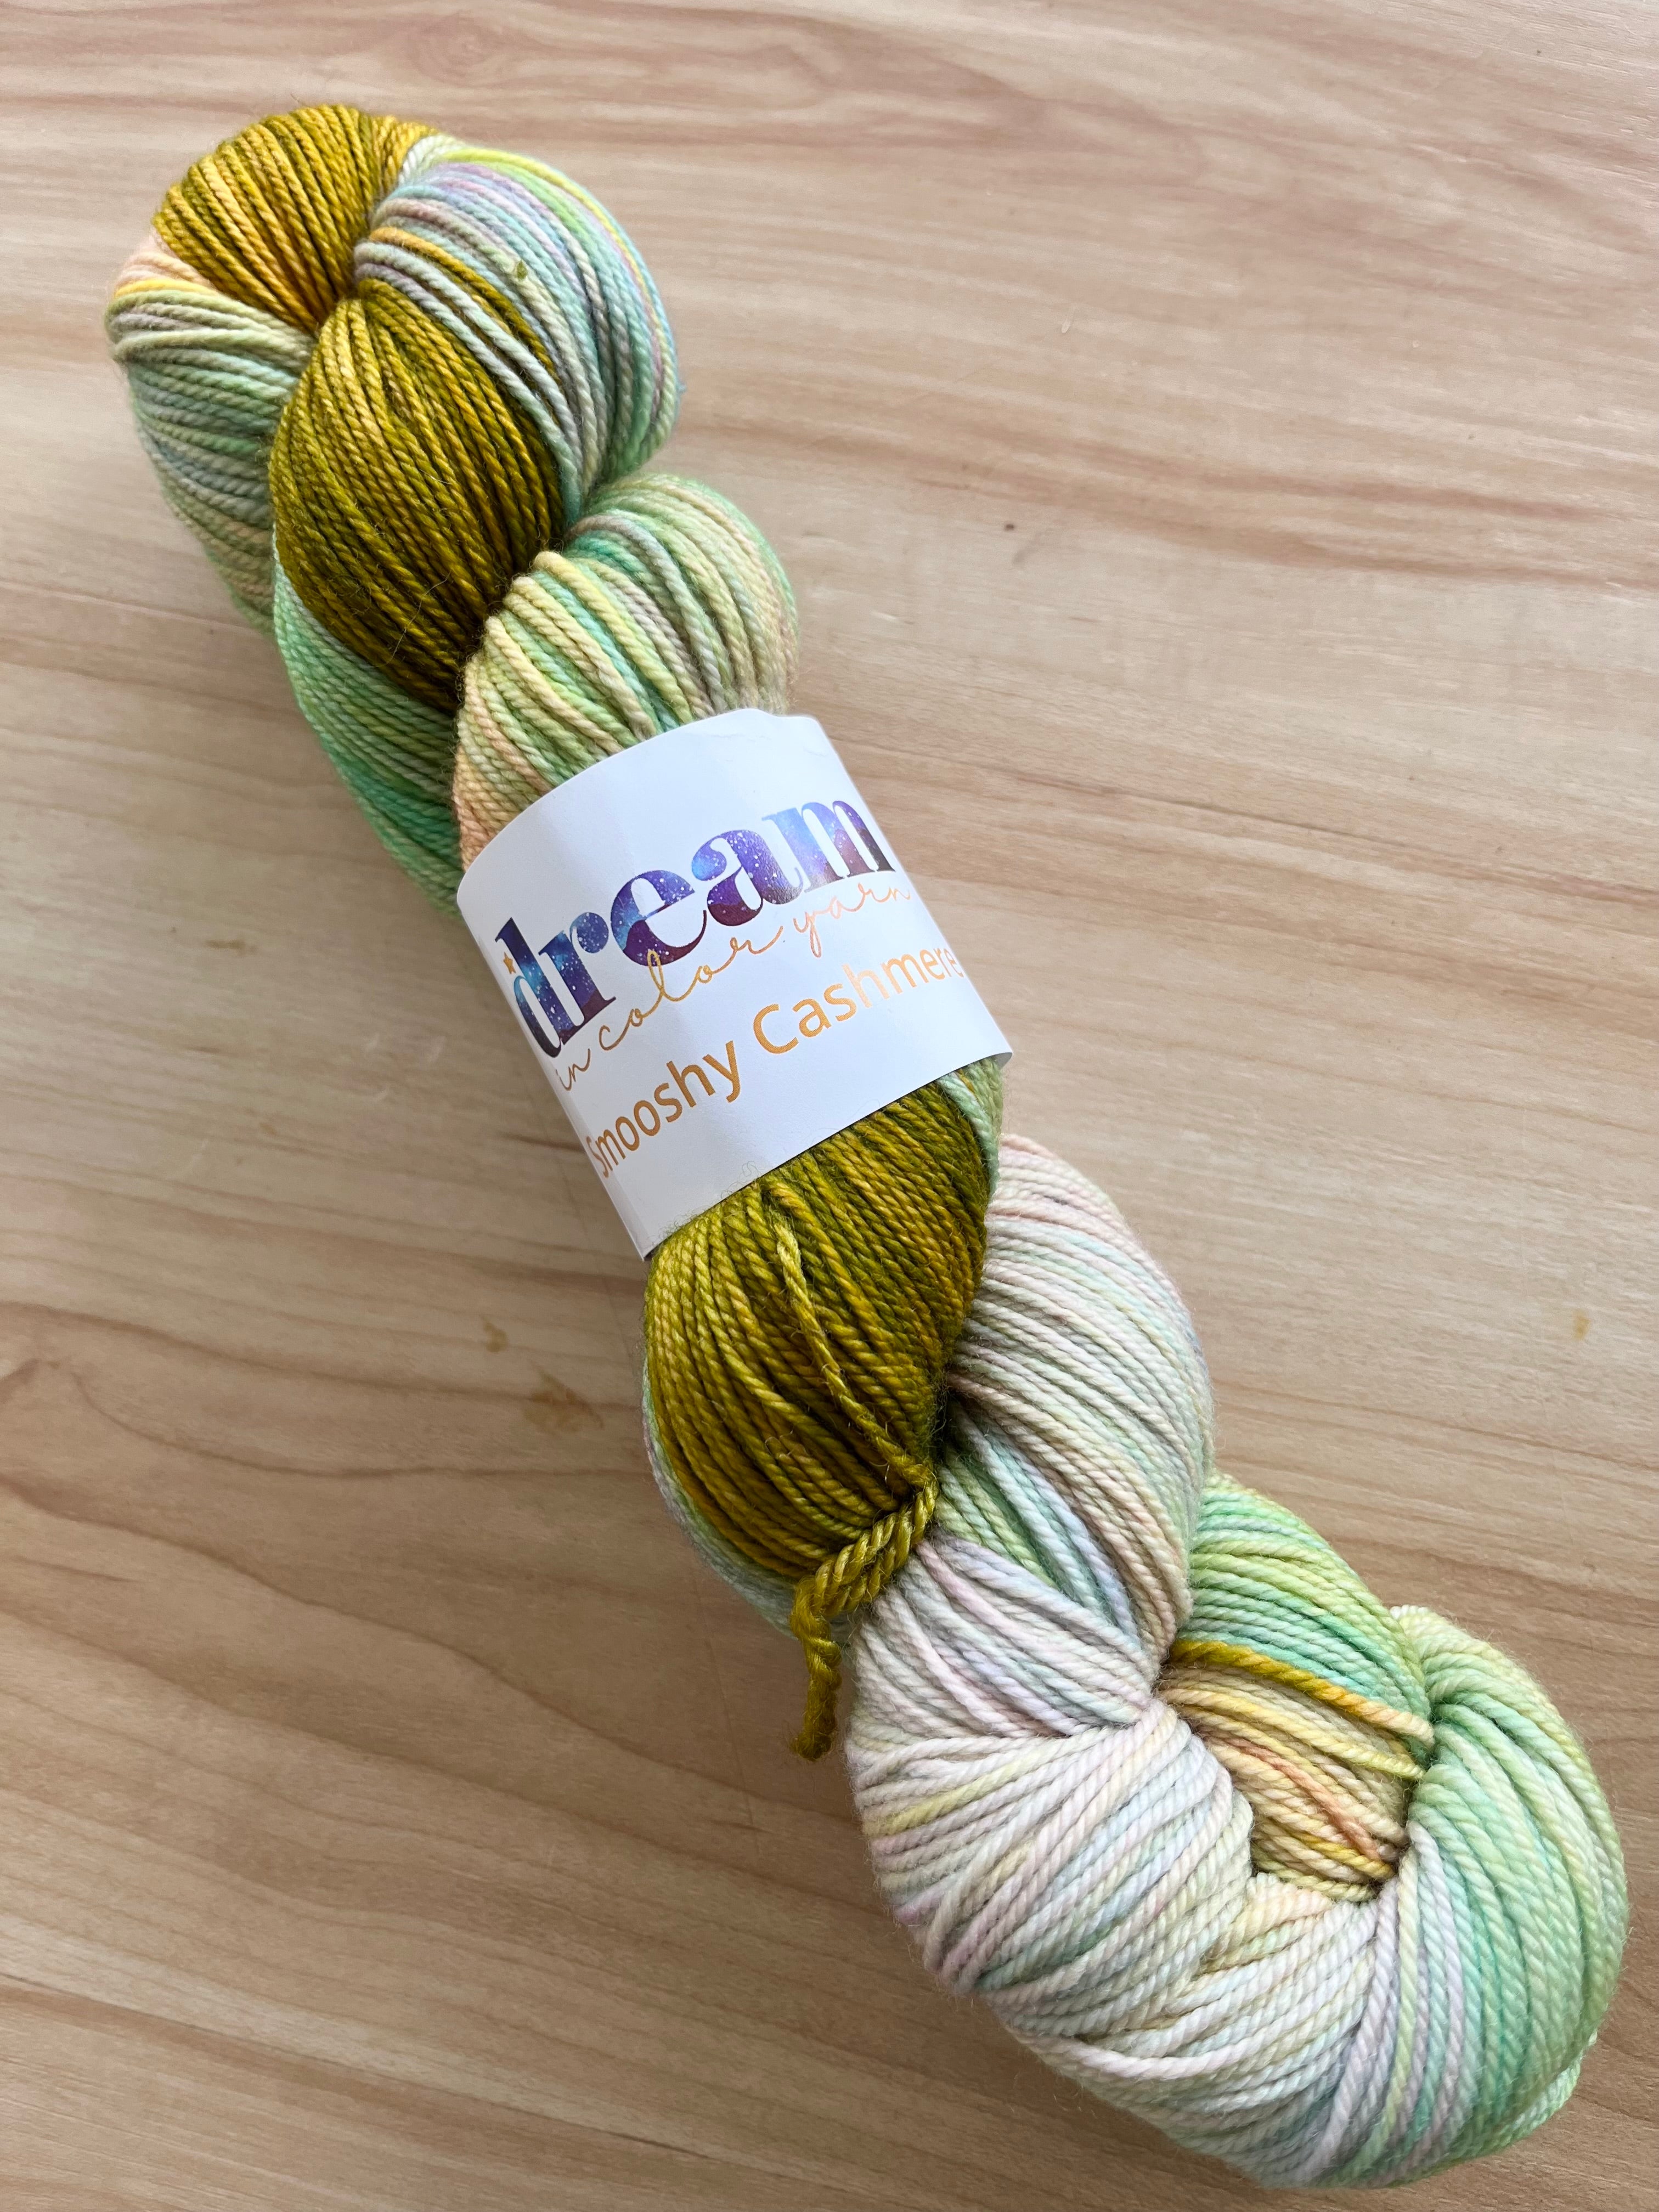 Spring Ballet - Smooshy Cashmere Planned Pooling yarn from Dream in Color